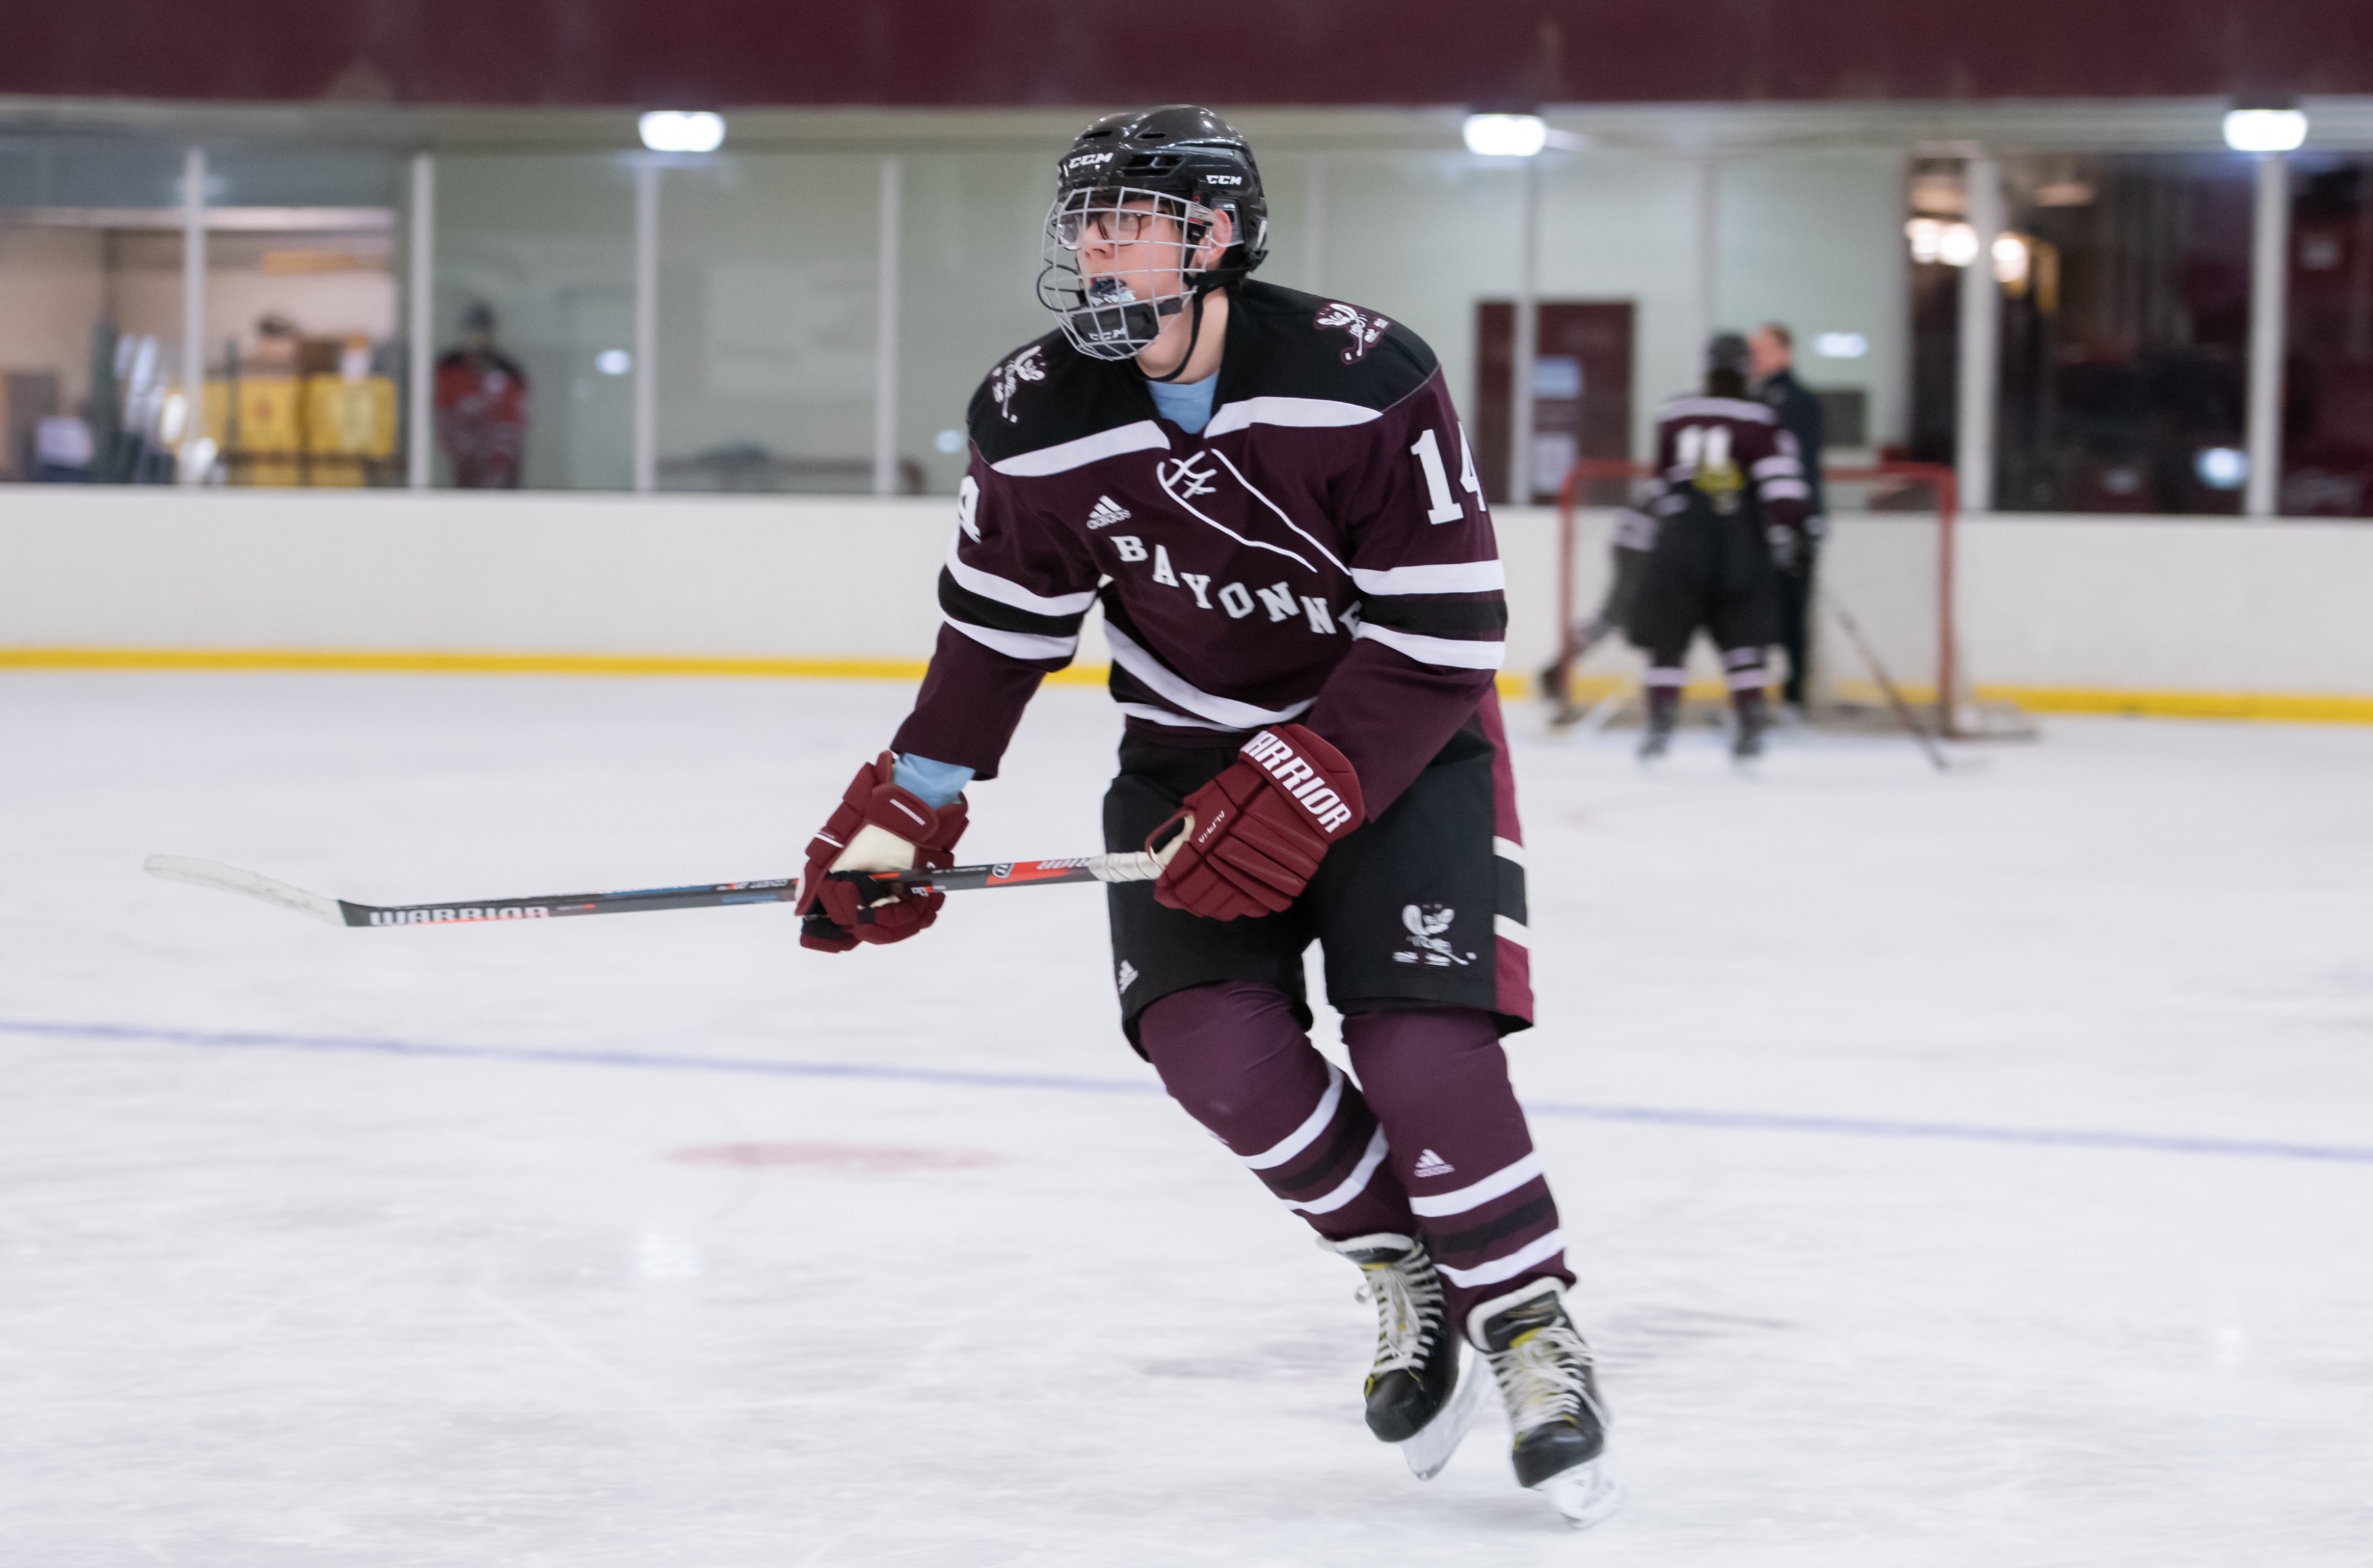 The Best Jerseys in Jersey: Your picks & ours for HS hockey's top